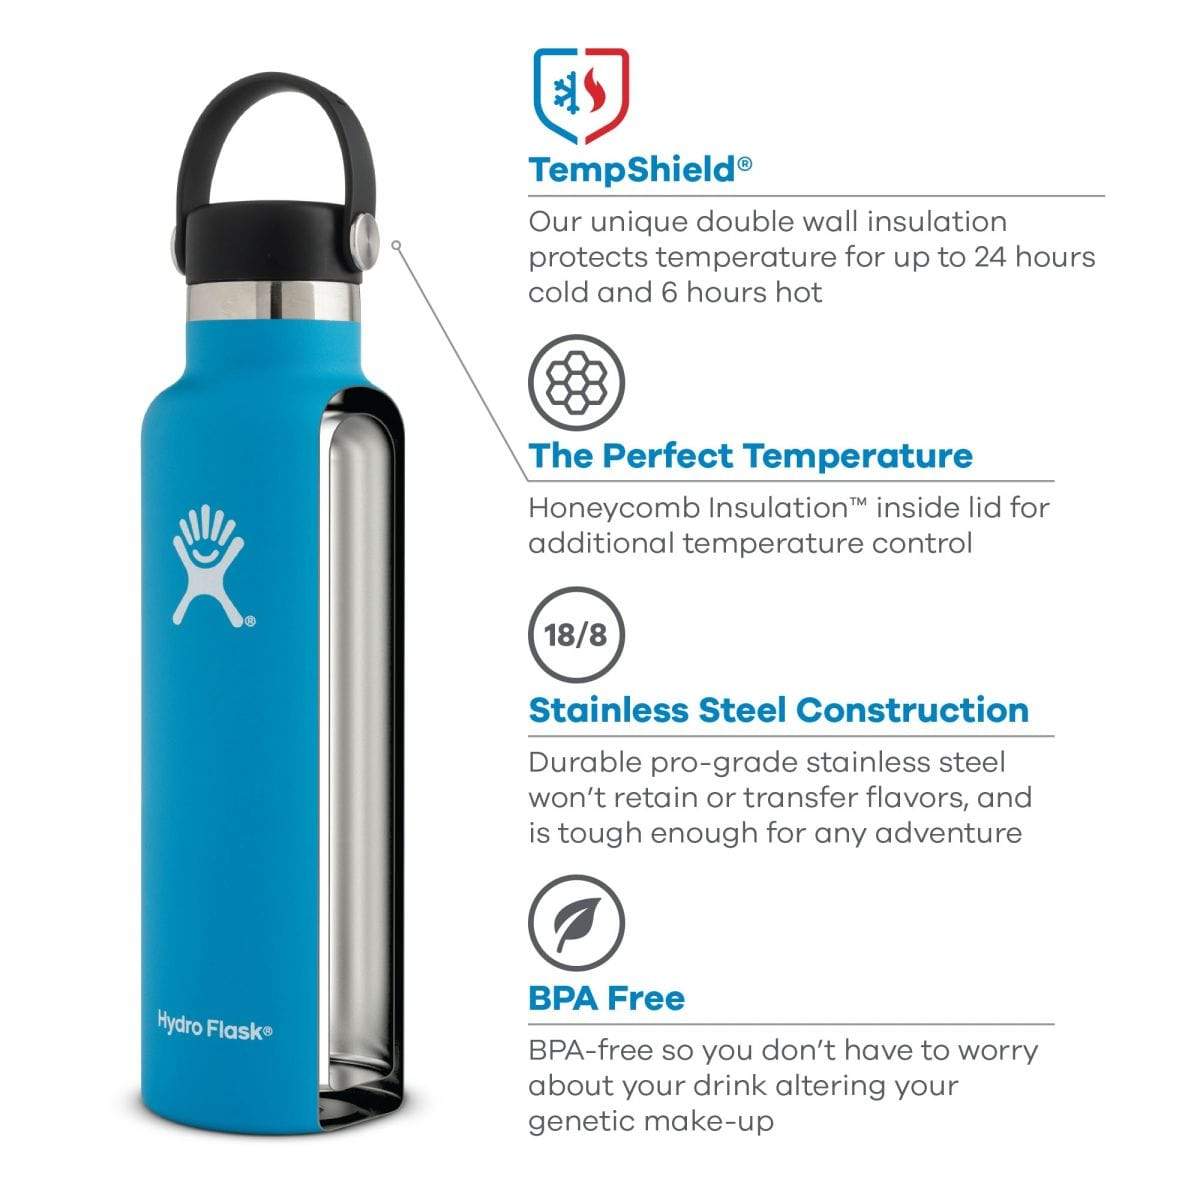 Vacuum Insulated Standard Mouth Stainless Steel Water Bottle with F, 18 oz  Stone